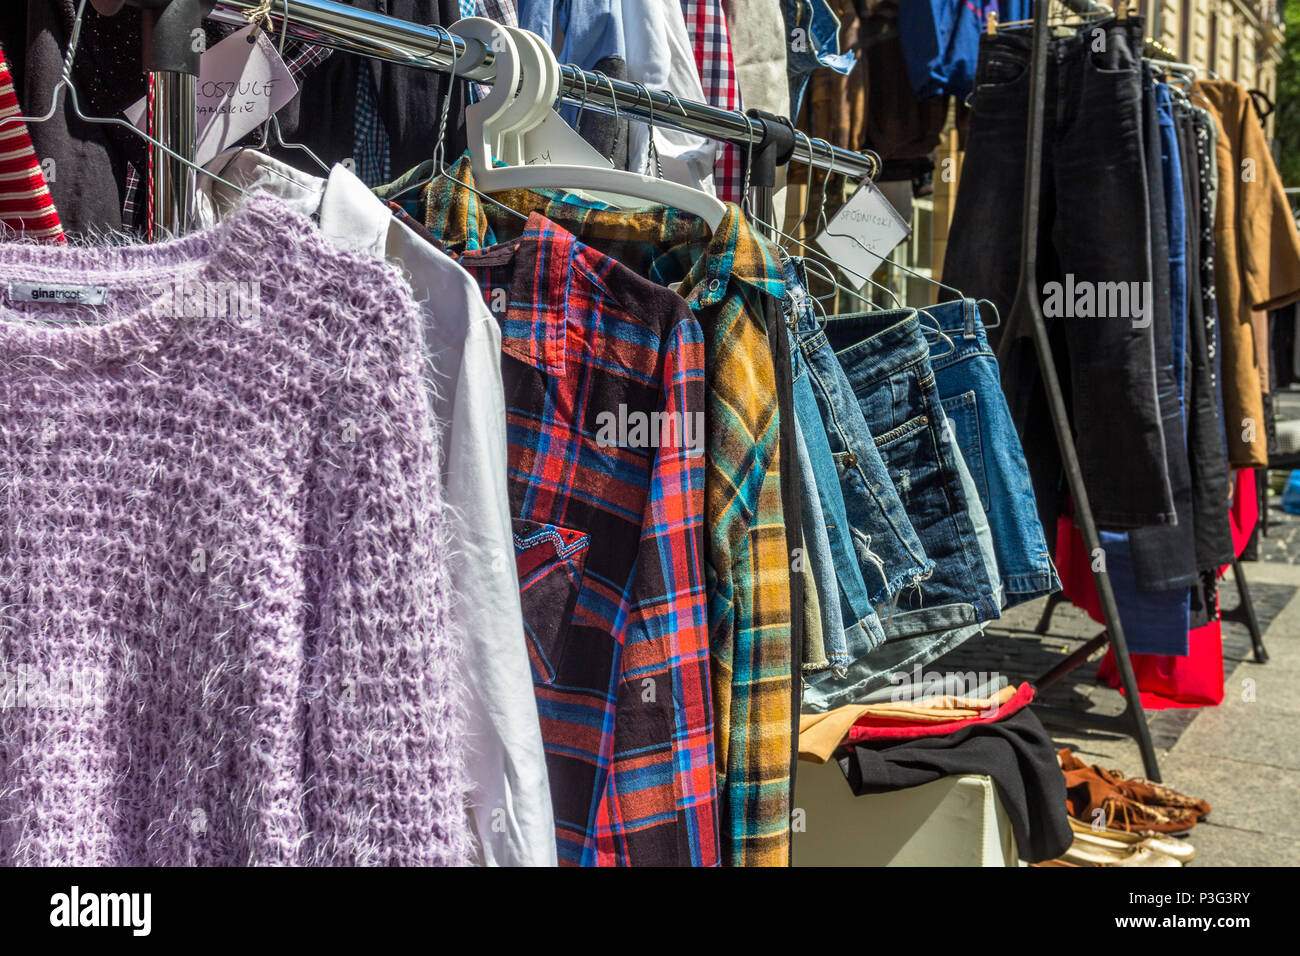 rail of second-hand clothes for sale at second-hand market in side street in Łódź, central Poland Stock Photo